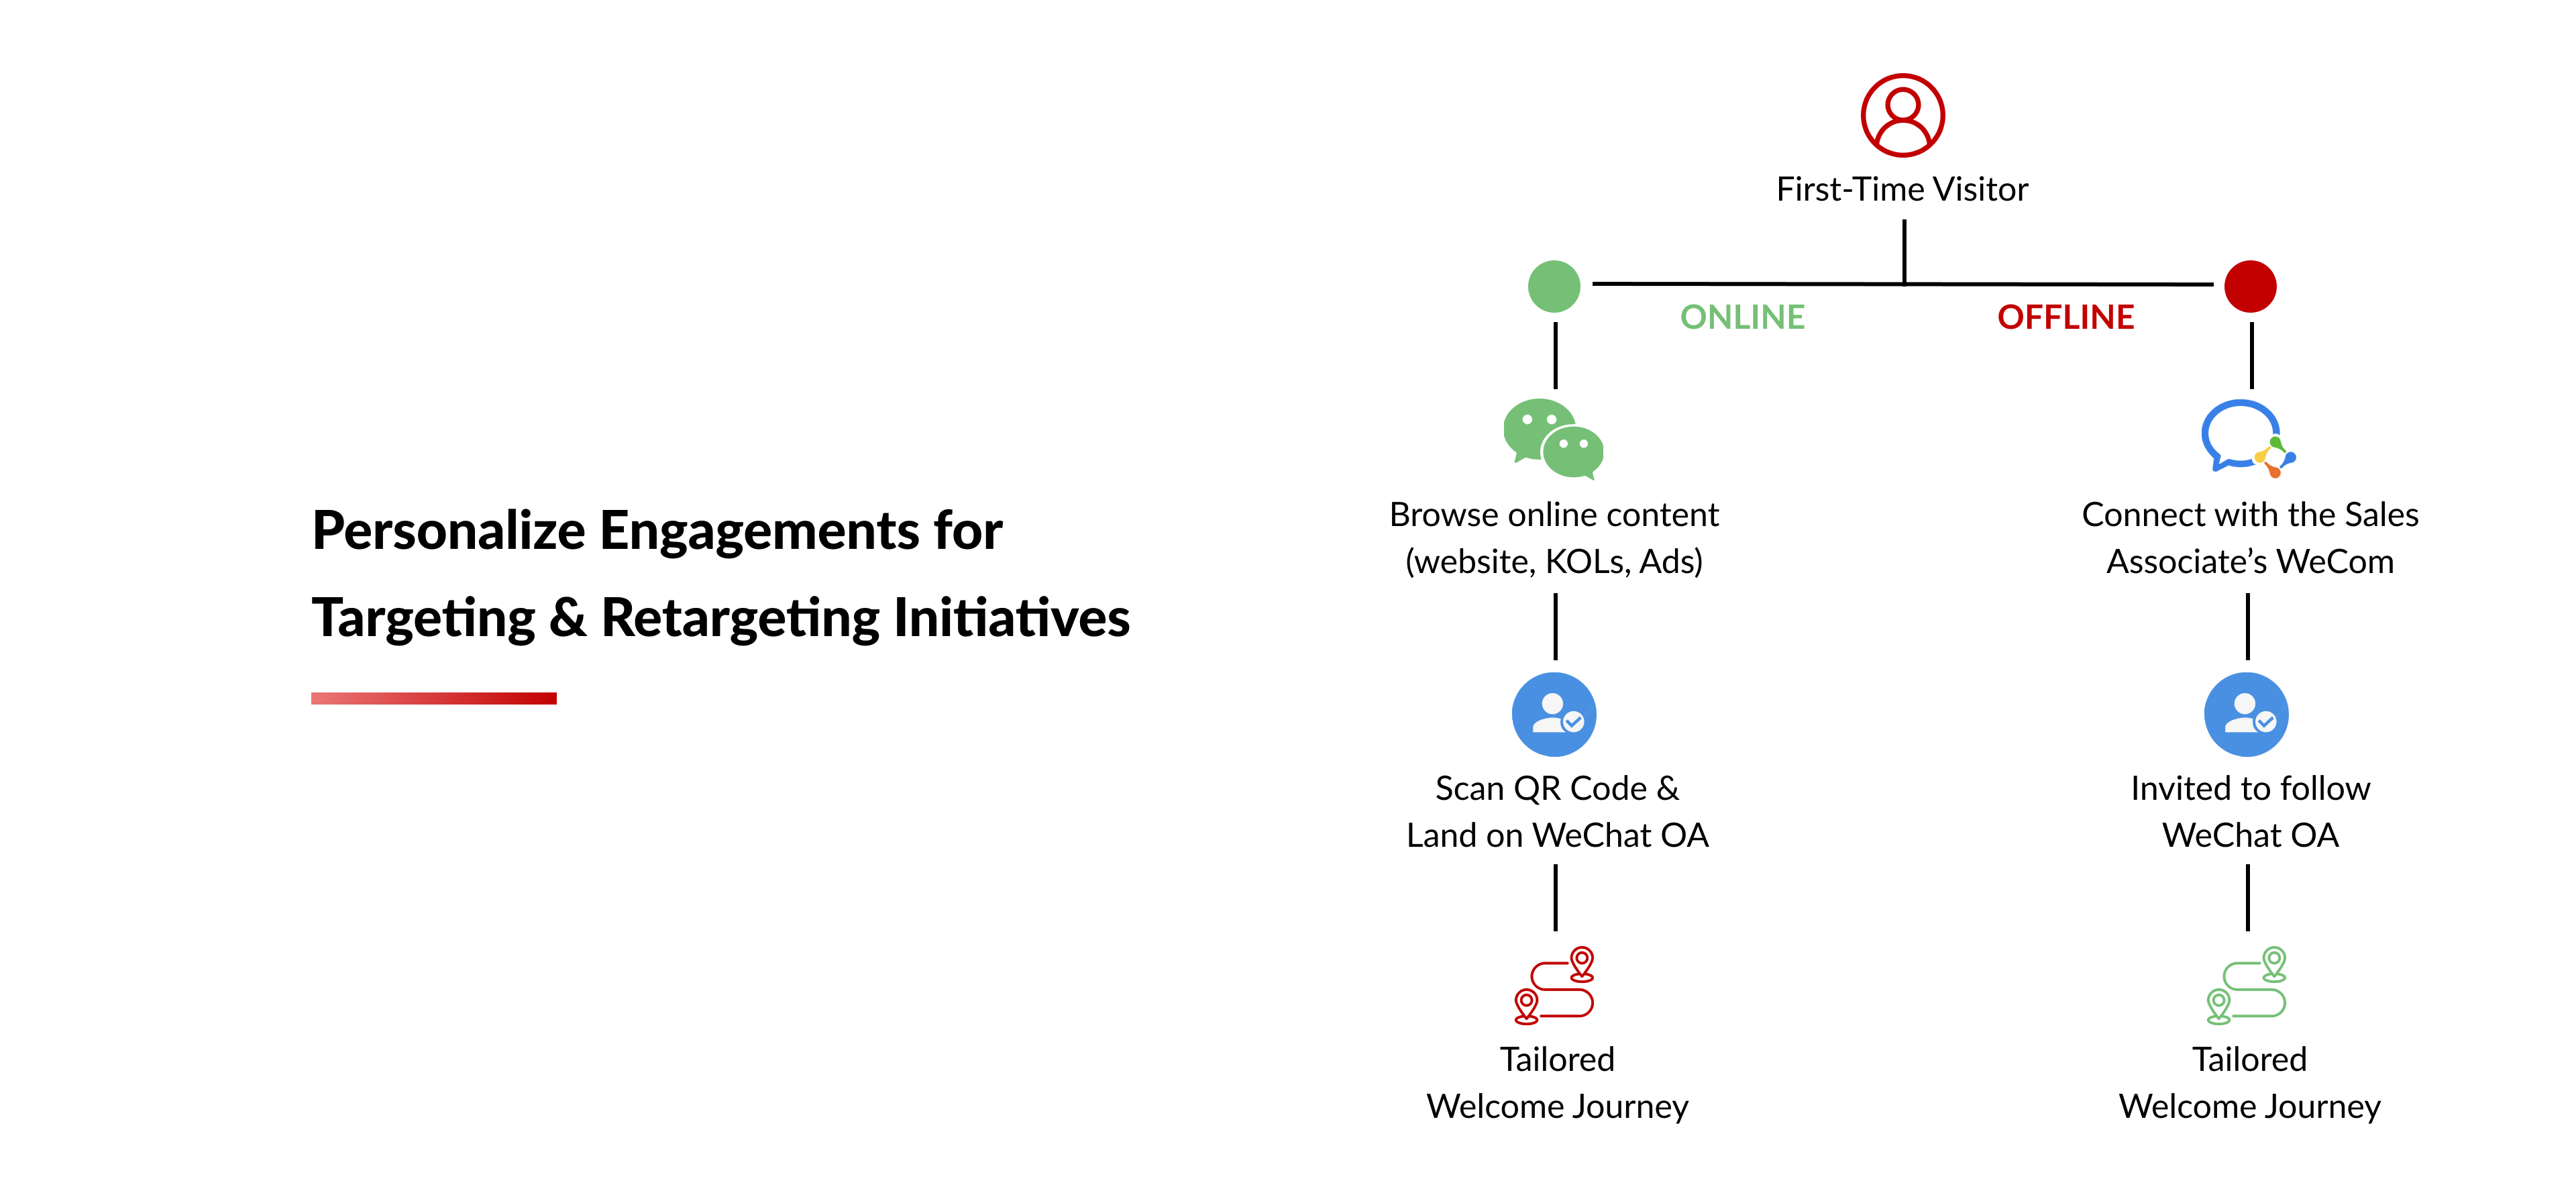 ITC can help you personalize engagements for Targeting & Retargeting initiatives